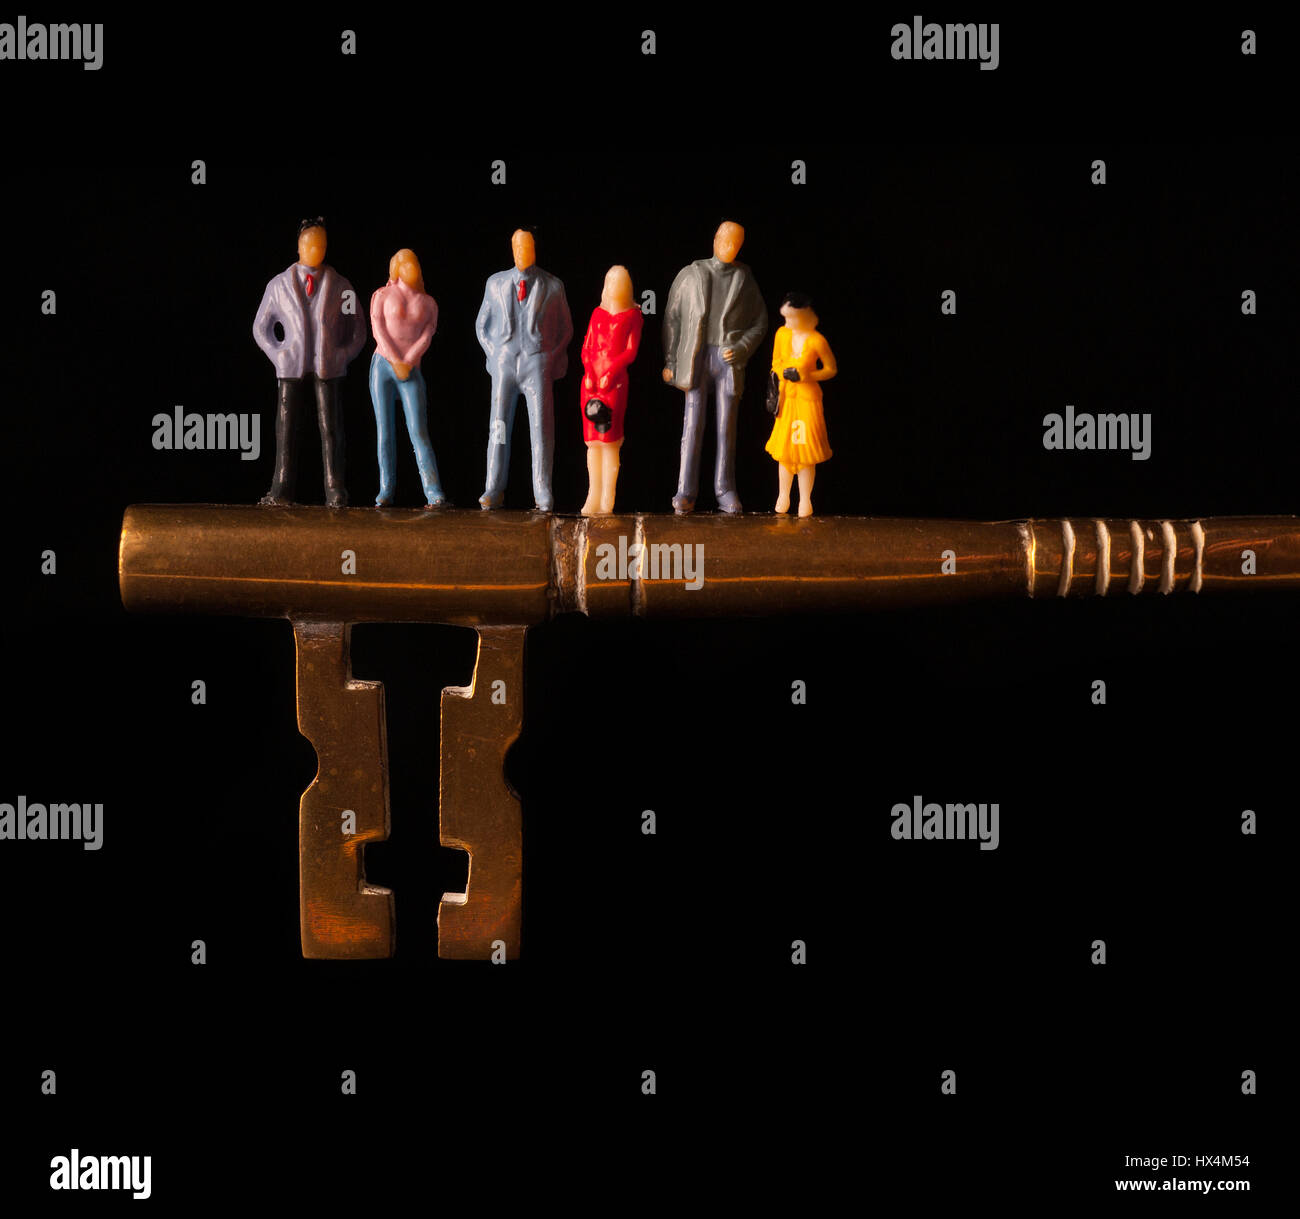 Group of miniature figures standing on giant brass key against black background Stock Photo